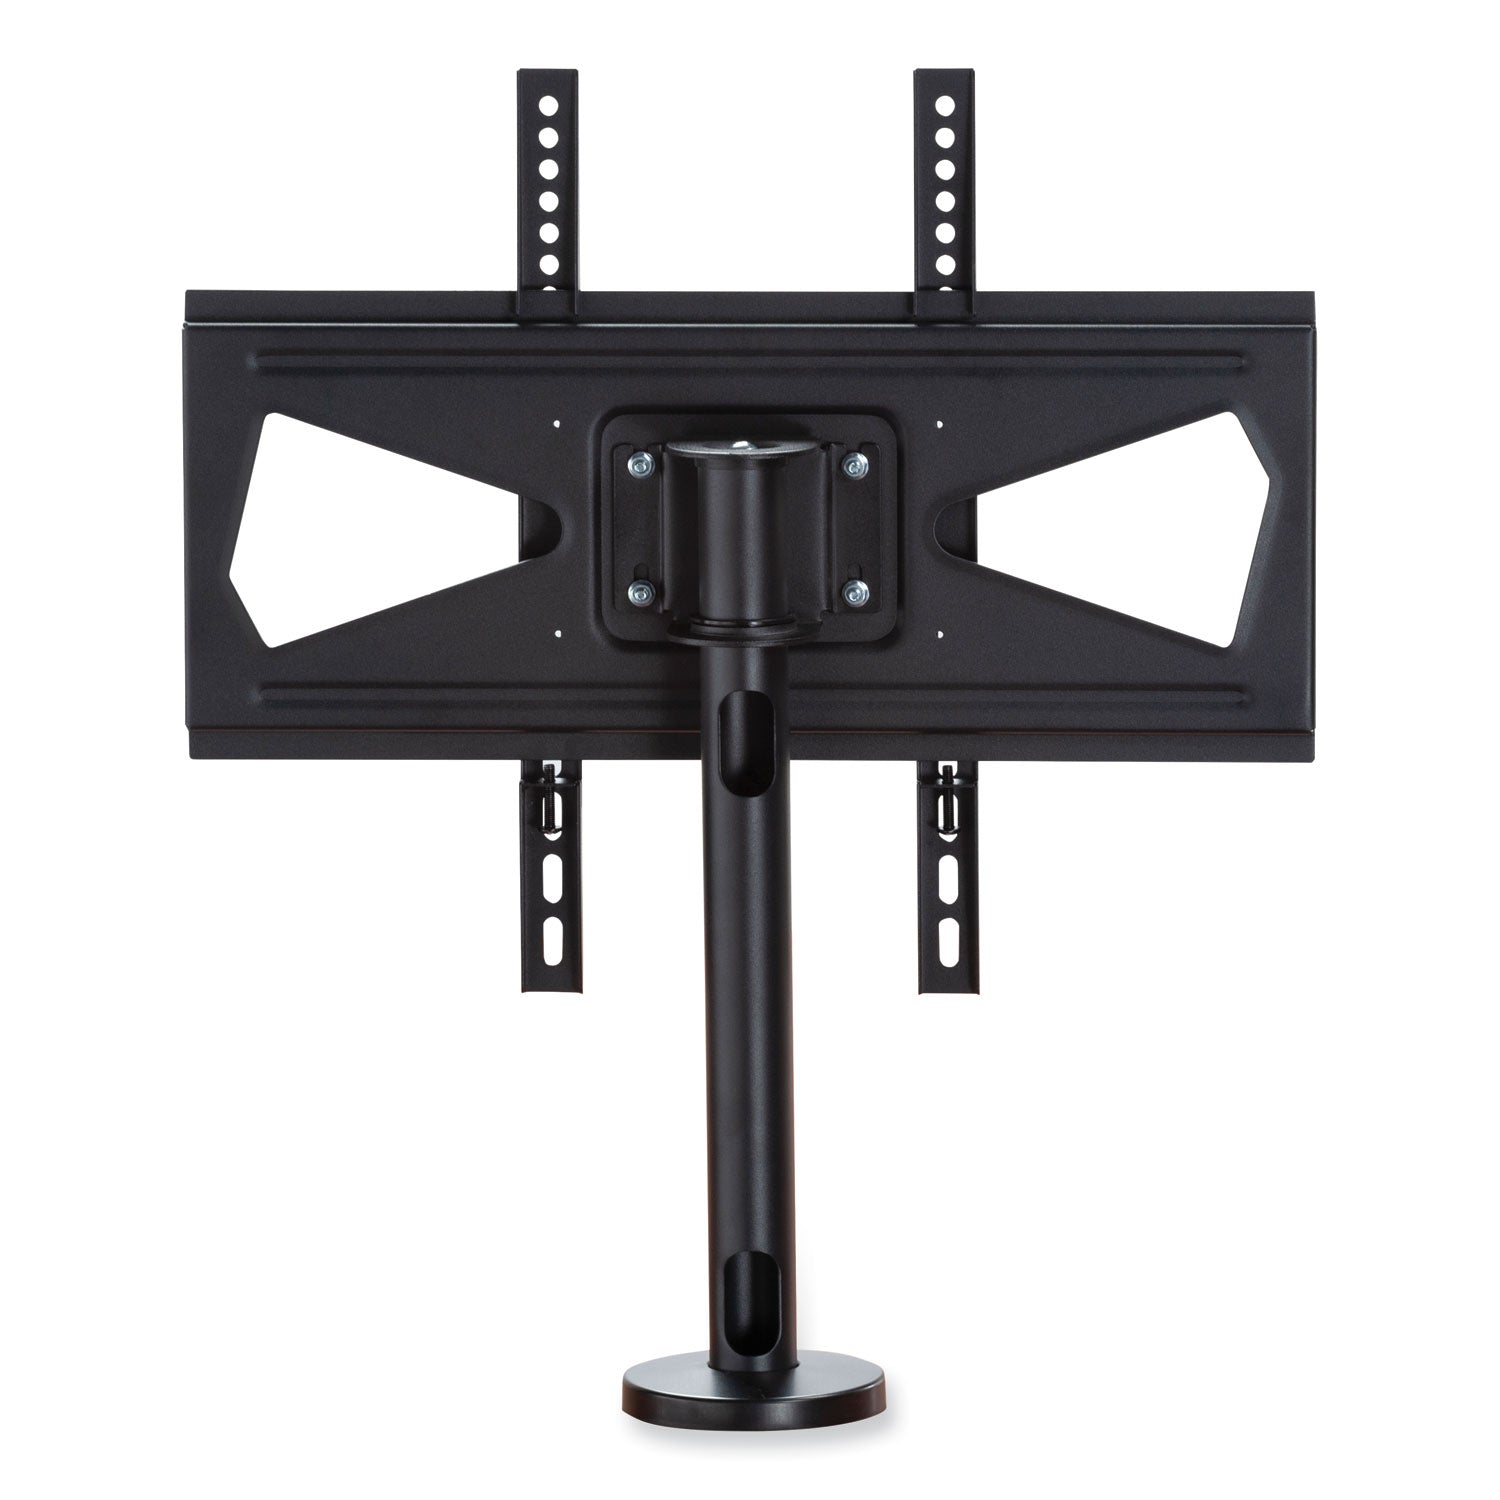 tabletop-tv-mount-2125-x-2475-x-2475-black-supports-50-lbs-ships-in-1-3-business-days_saf2144bl - 3